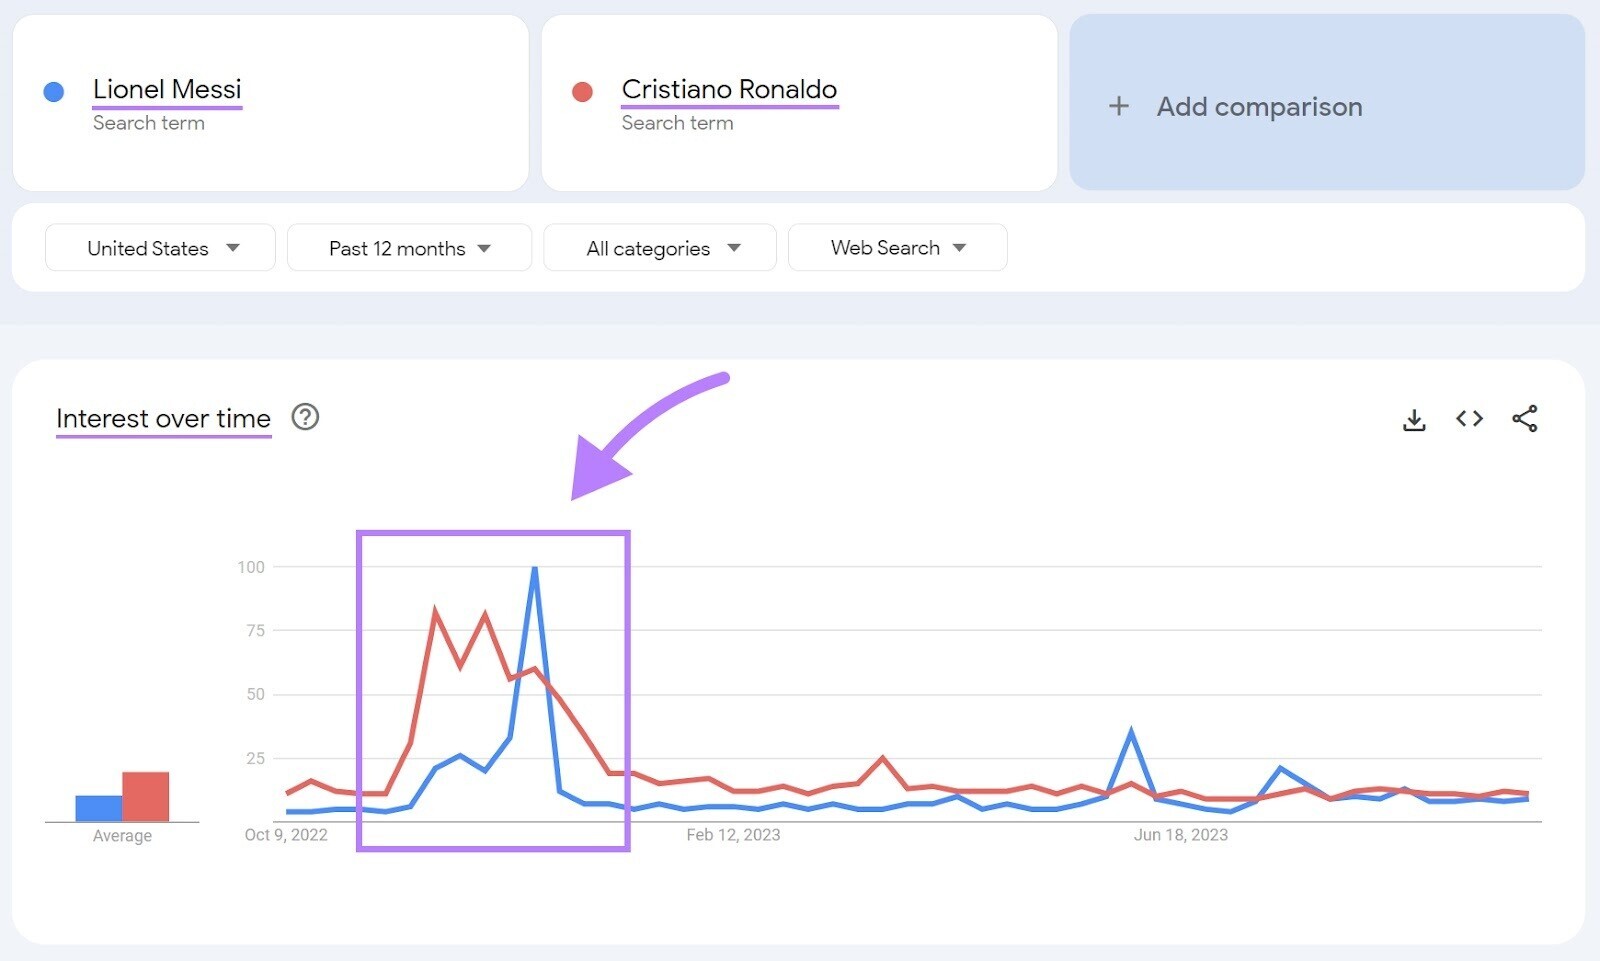 Google Trends interest over time graph showing results for Lionel Messi and Cristiano Ronaldo